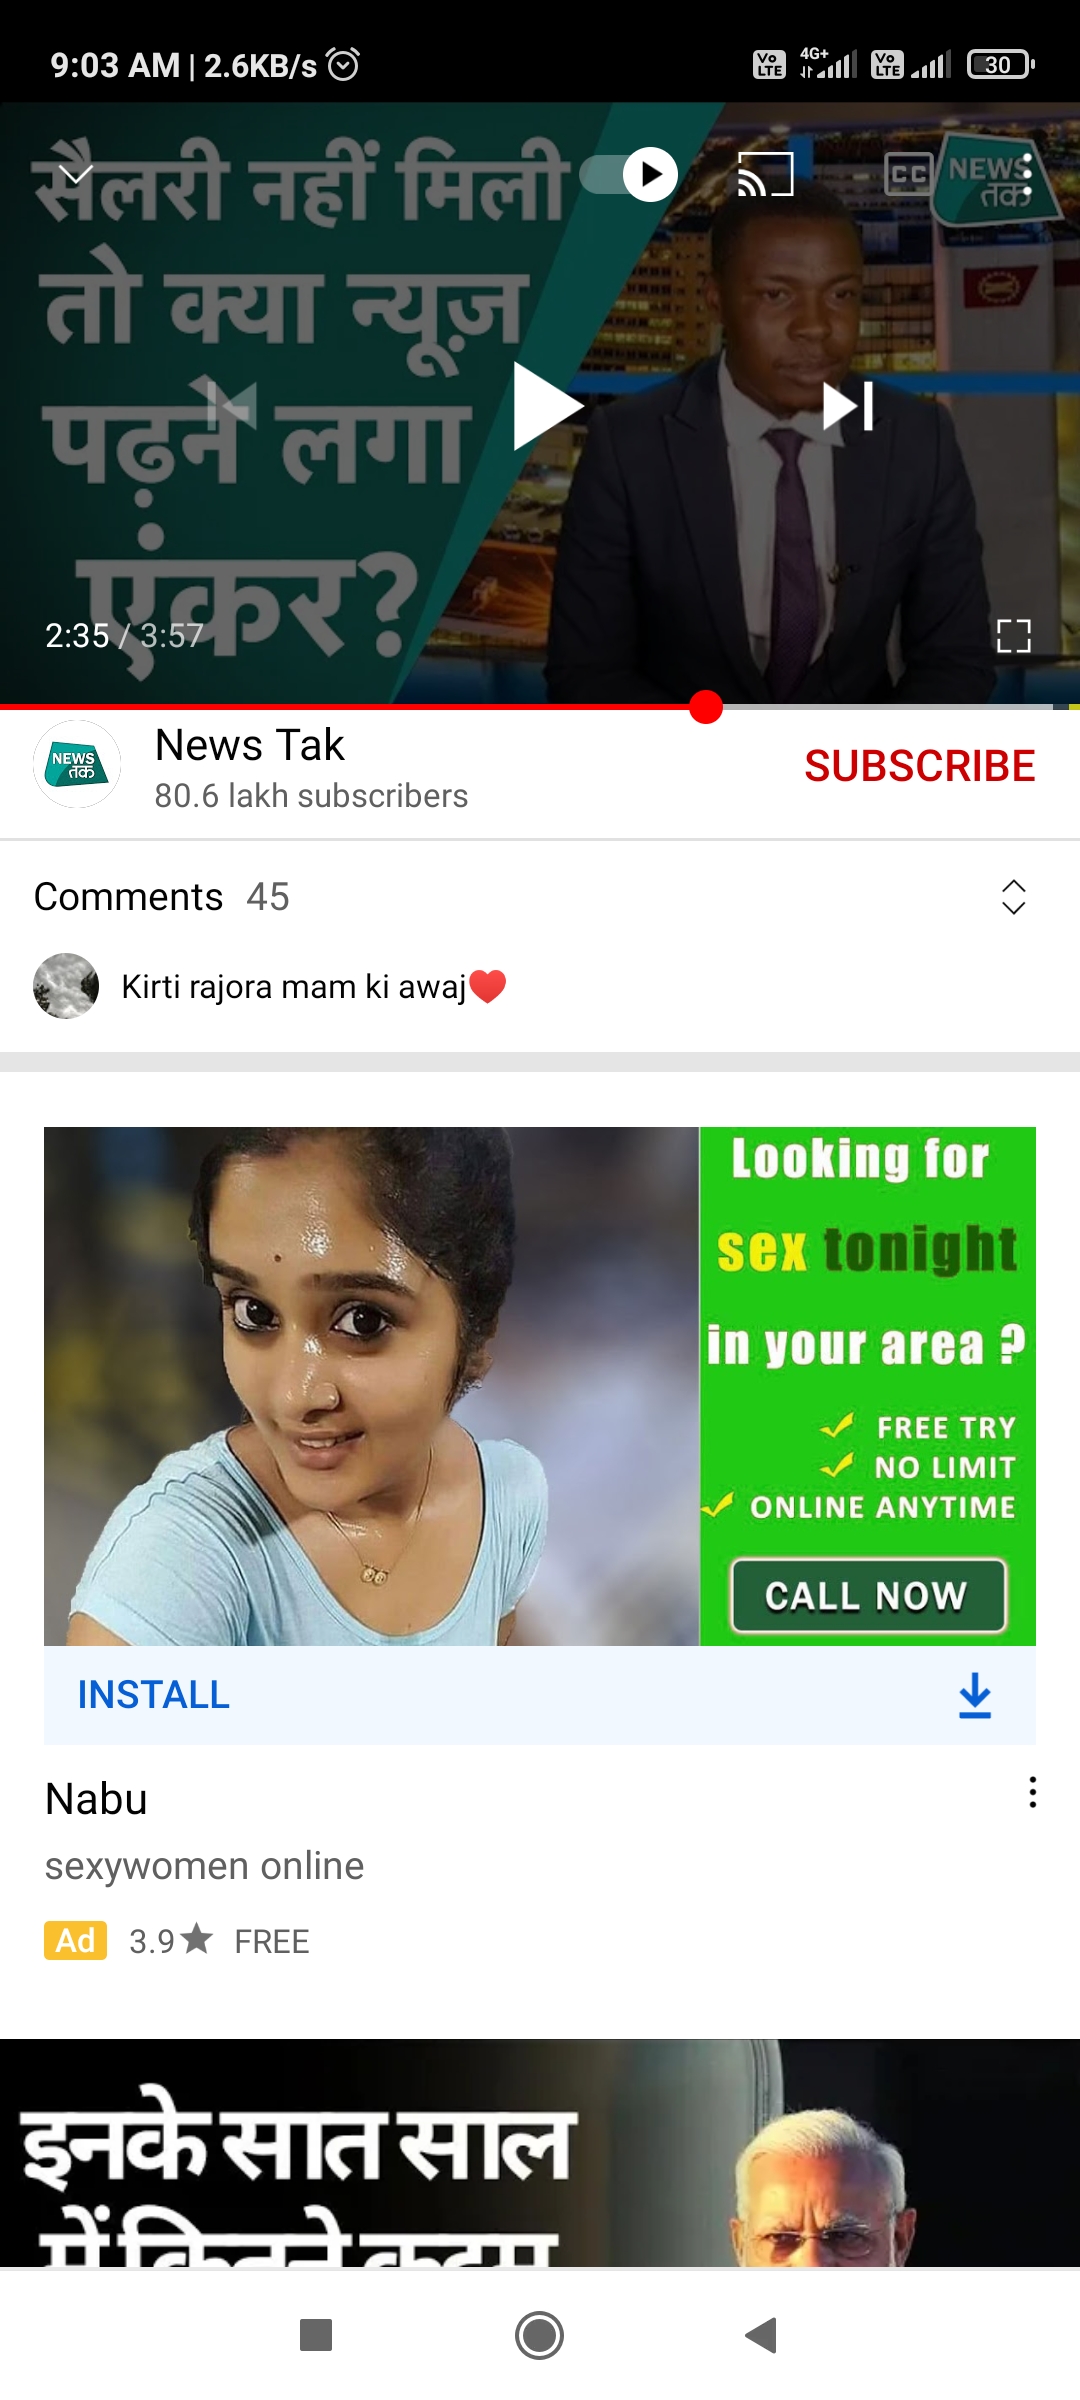 Girls In Porn Ads - In youtube ads is totally sex girls selling video ads , porn graphic , ads  showing totally feka - YouTube Community